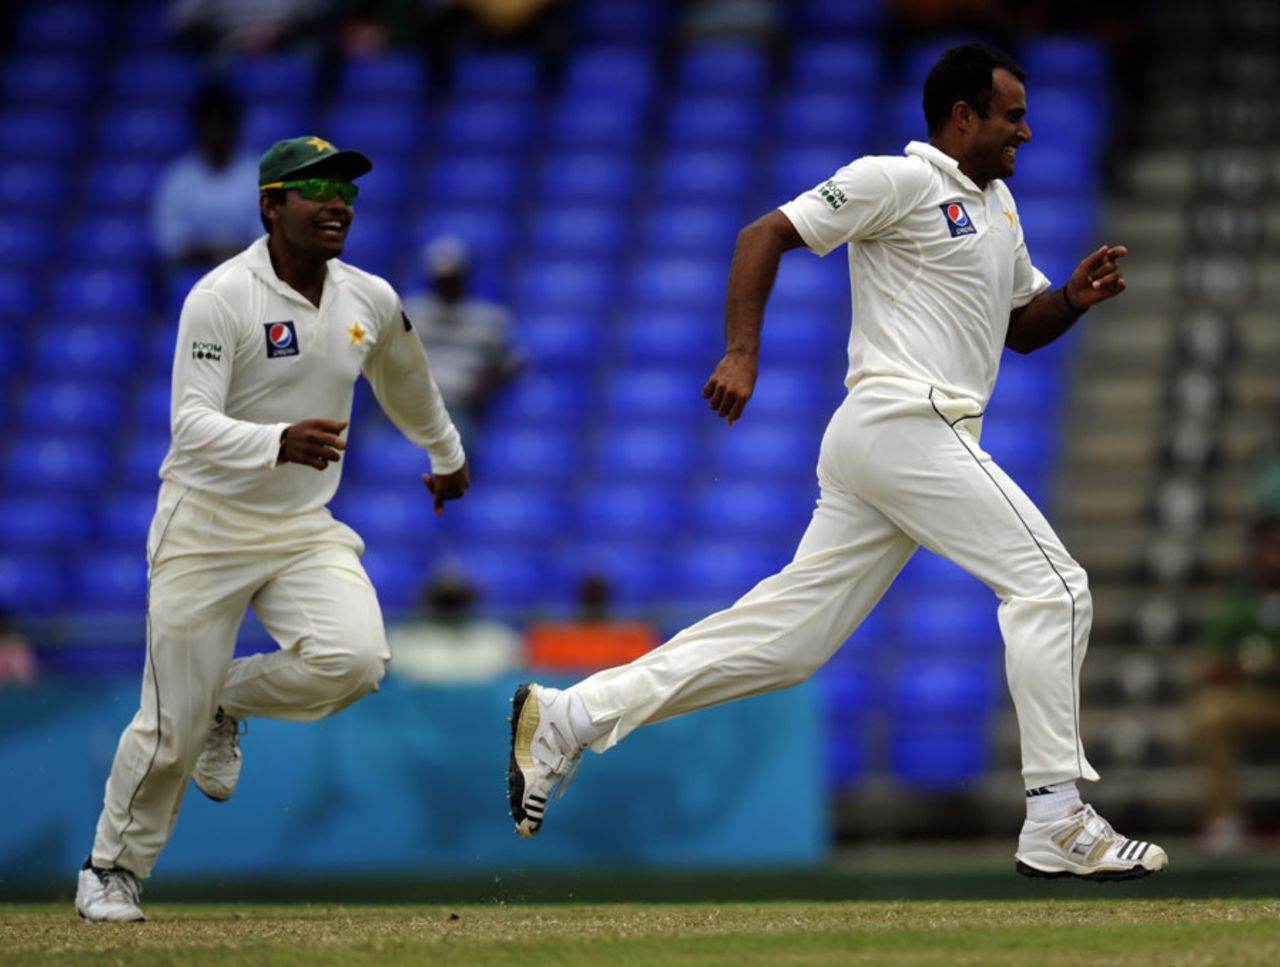 Tanvir Ahmed got Lendl Simmons for a duck, West Indies v Pakistan, 2nd Test, St Kitts, 2nd day, May 21, 2011